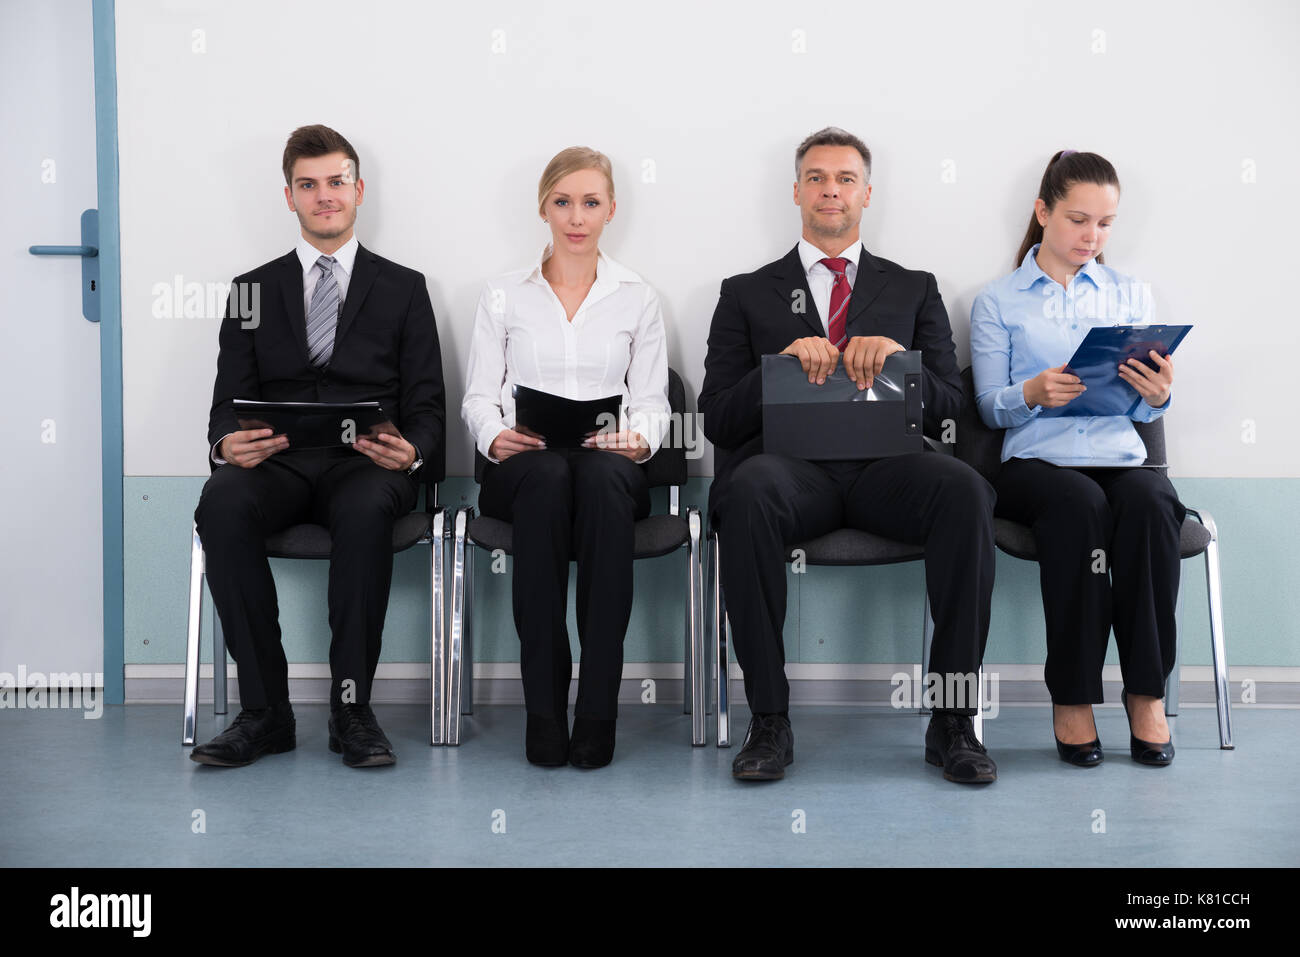 Group Of Businesspeople With Files Sitting On Chair For Giving Interview Stock Photo